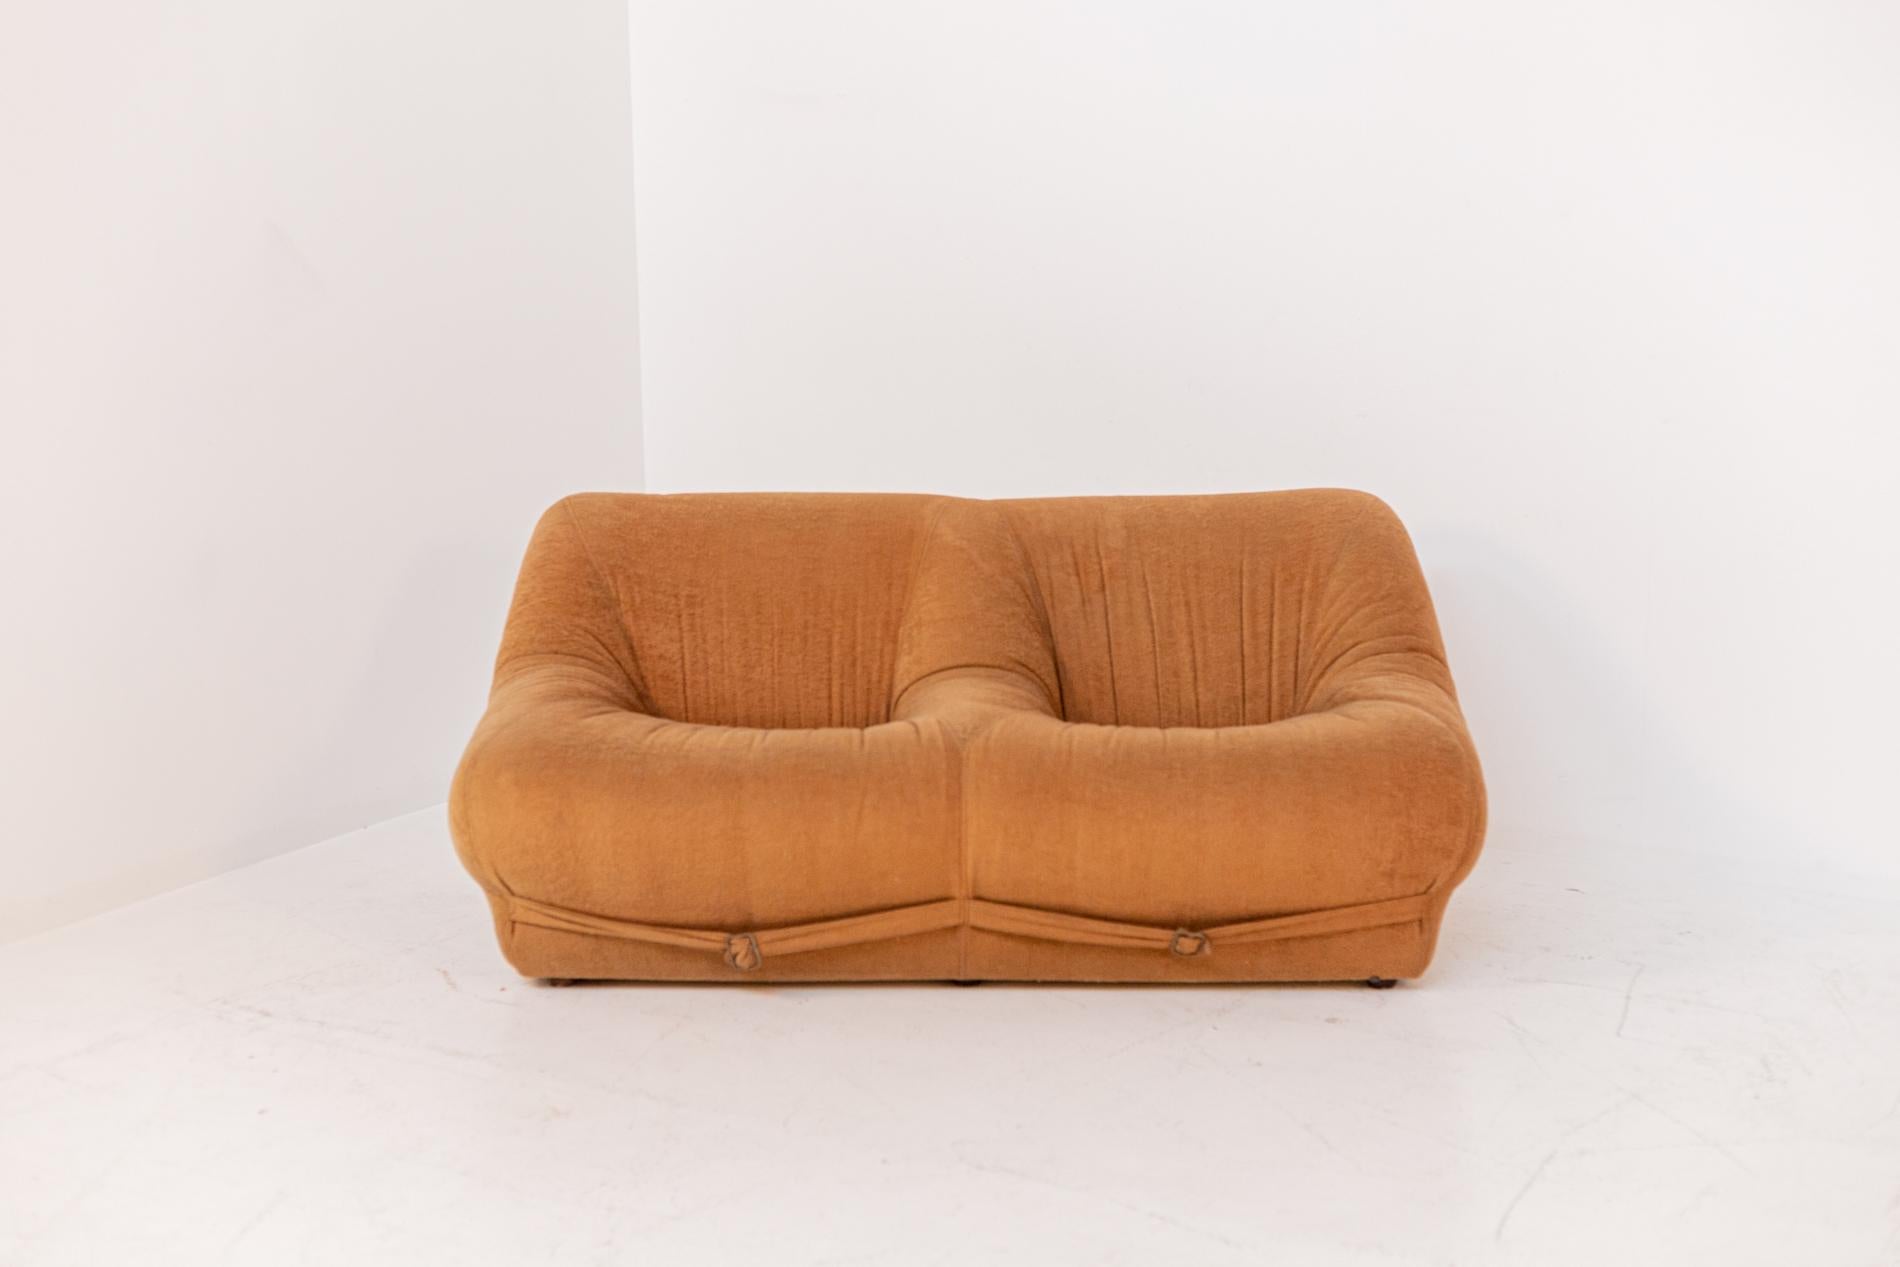 Beautiful two seater Italian velvet sofa from the Space Age period of the 70s.
The Italian sofa was made of dark orange velvet fabric. Its lines are very rounded with soft and enveloping shapes. 
In the back and under the feet we find a belt also